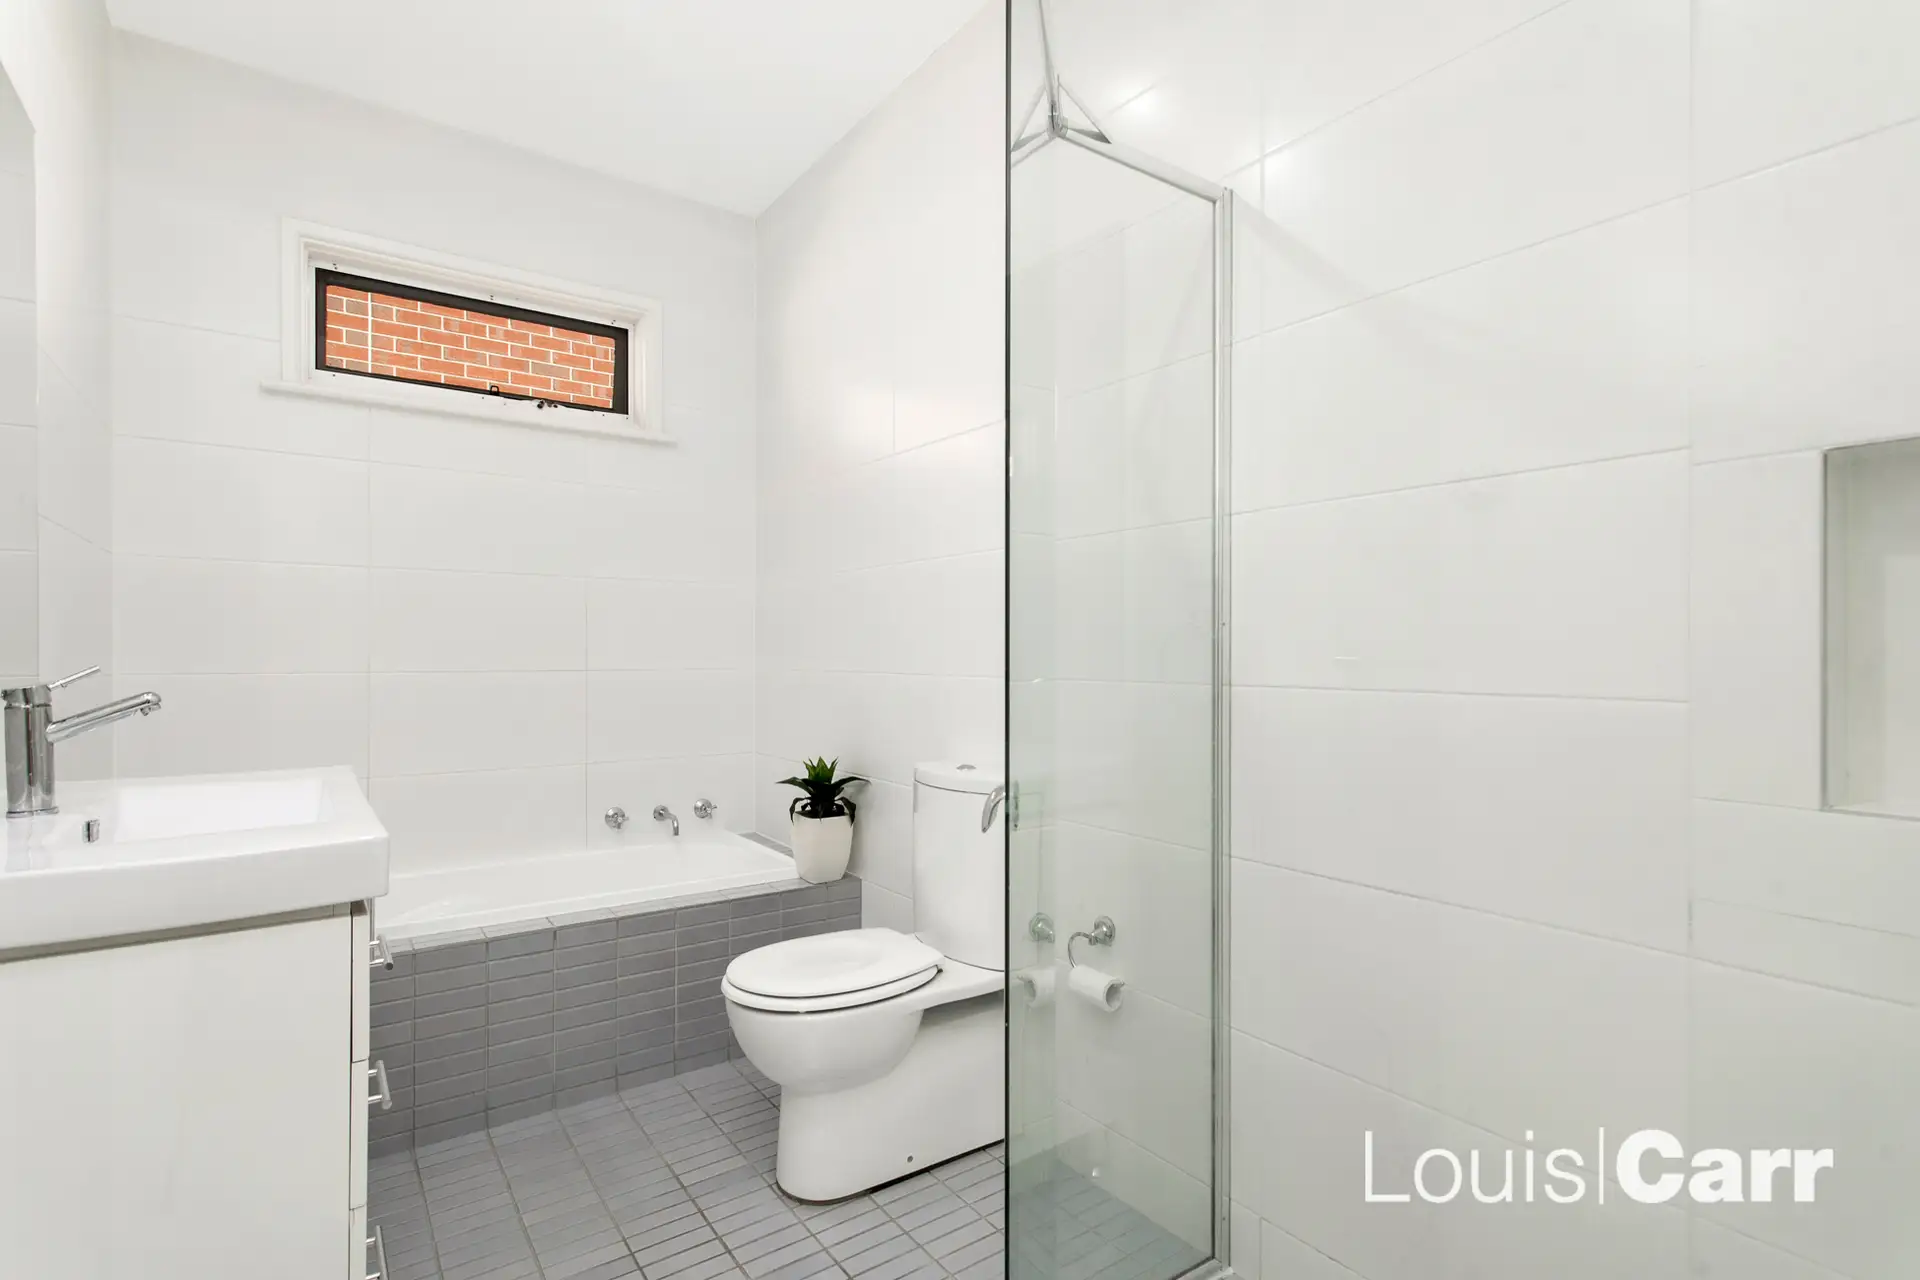 Photo #6: 103 Victoria Road, West Pennant Hills - Sold by Louis Carr Real Estate